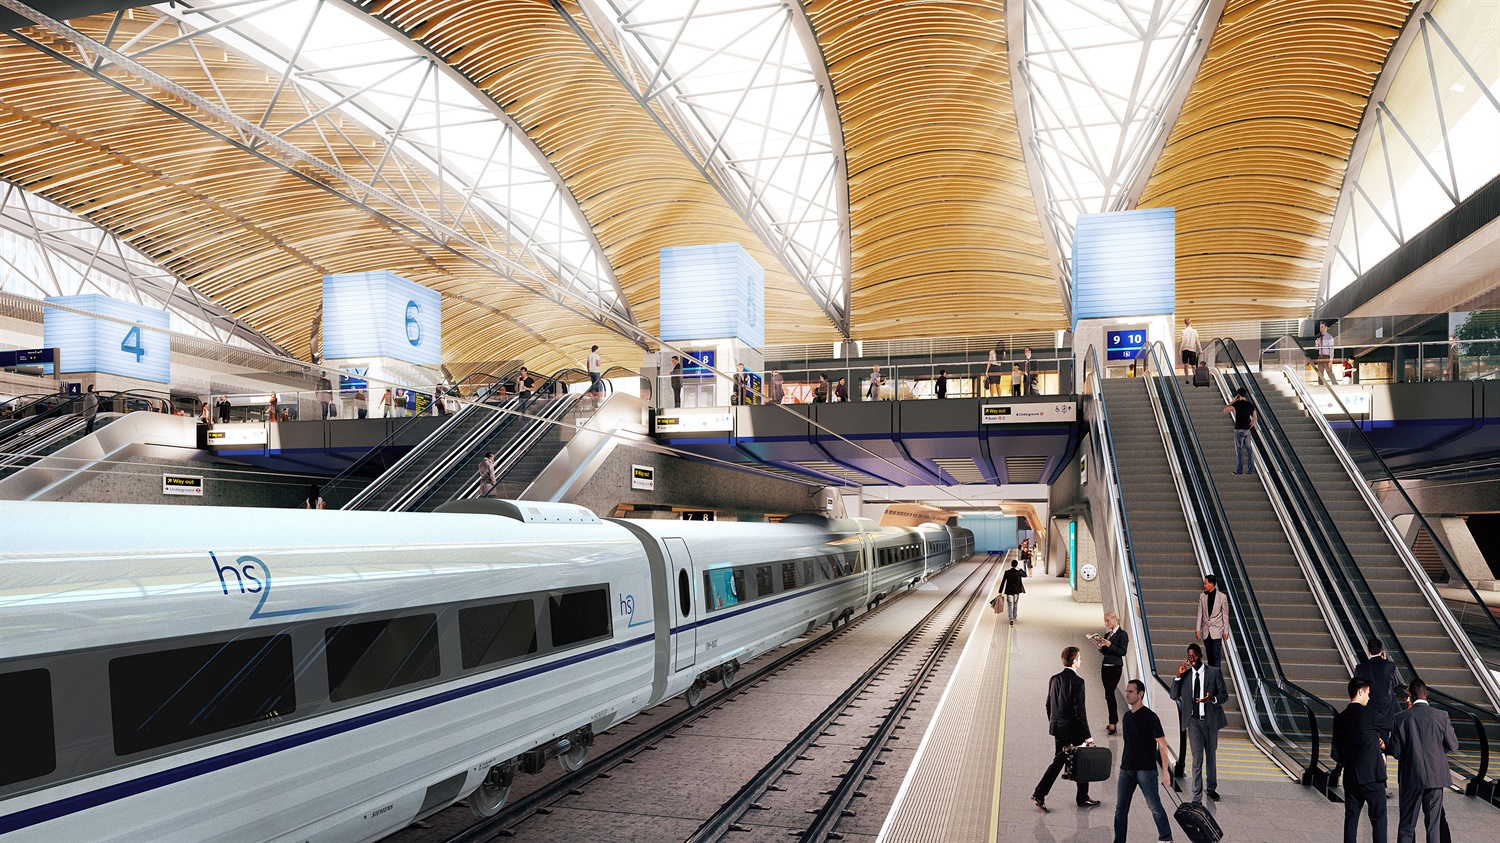 2018: The year of opportunity for HS2